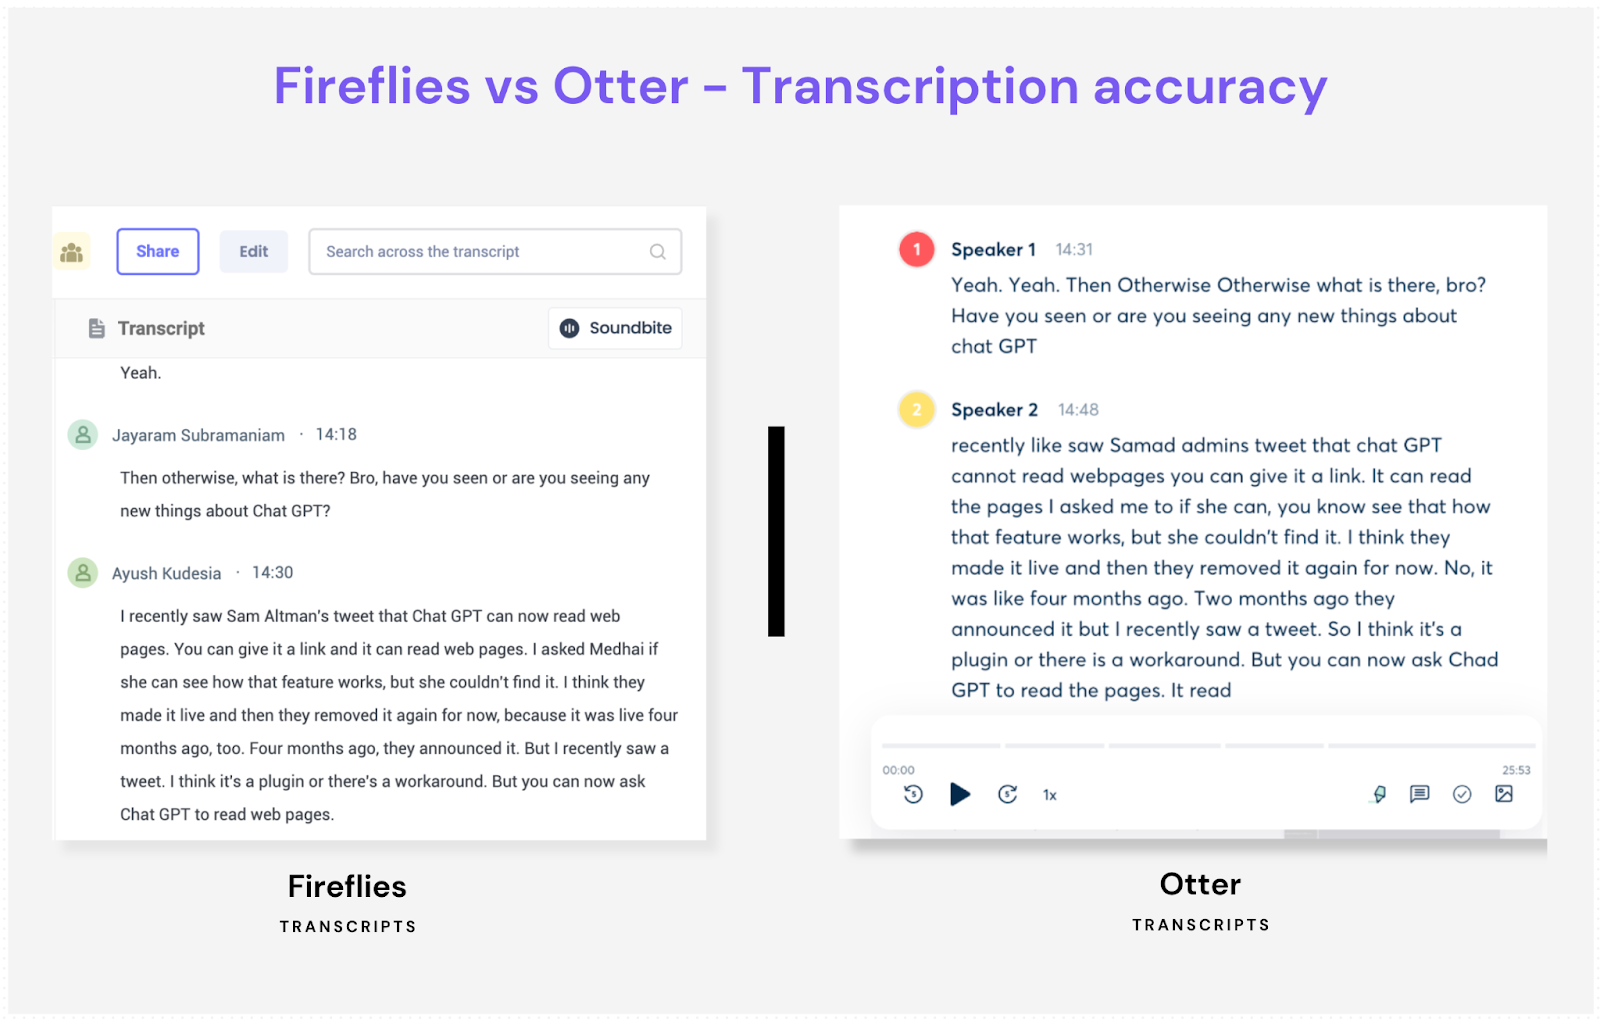 A real-time comparison between transcripts by Otter and Fireflies